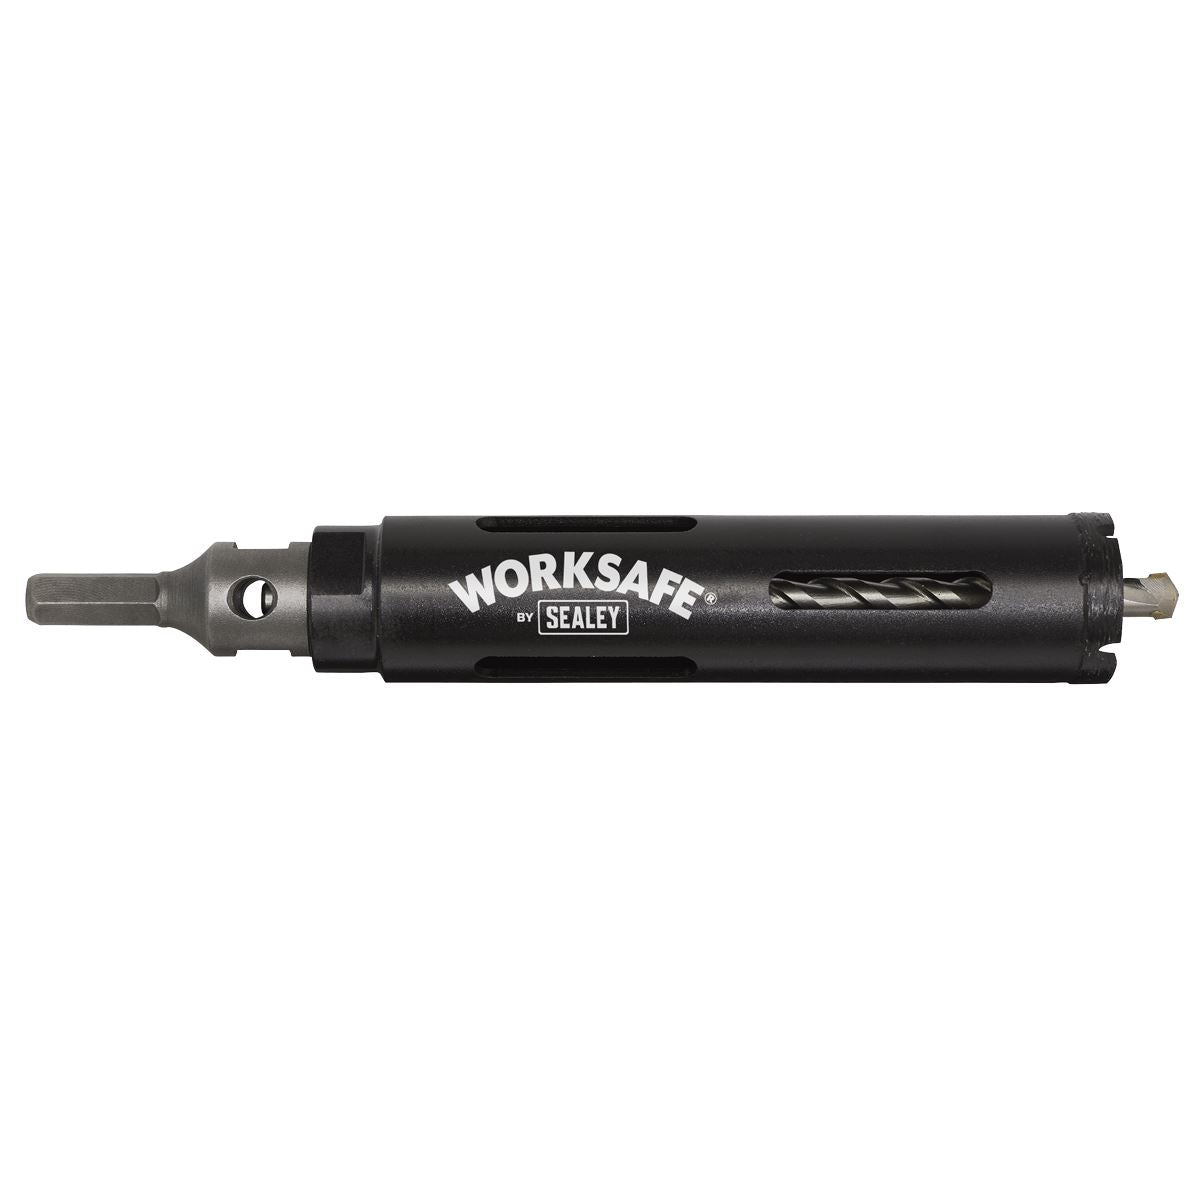 Worksafe by Sealey Core-to-Go Dry Diamond Core Drill Ø38mm x 150mm